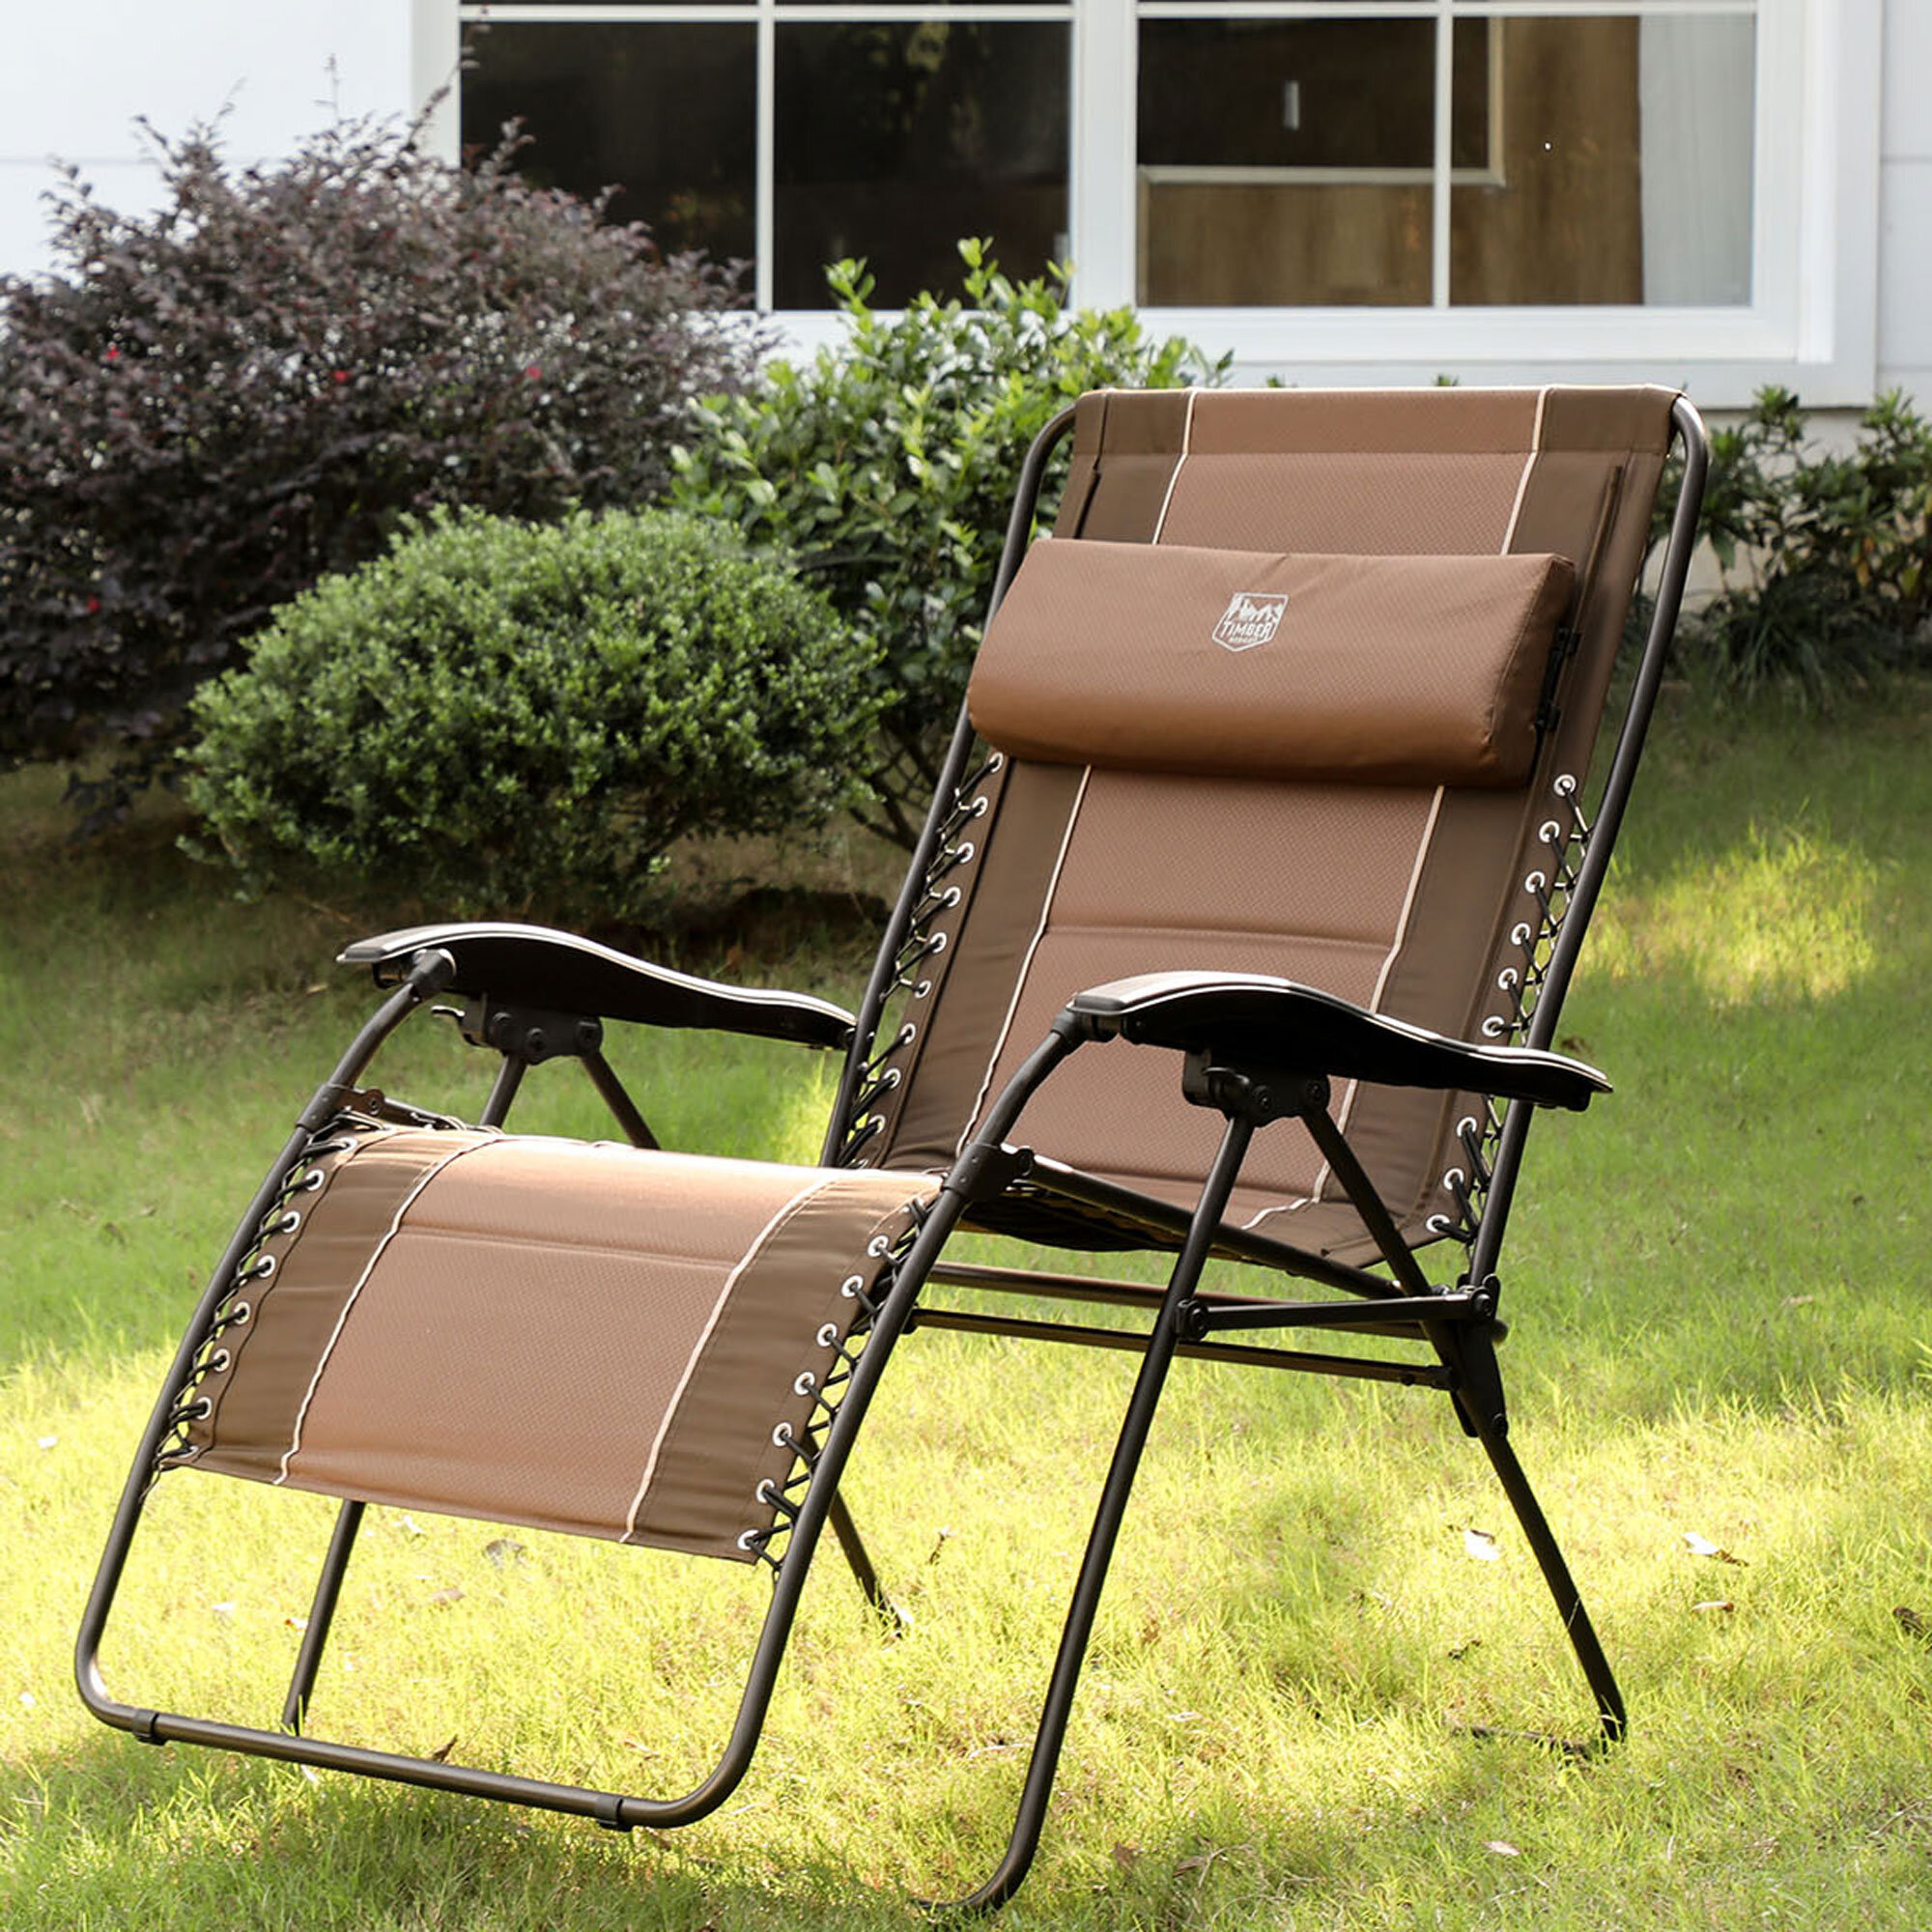 Portable Gravity Folding Lounge Beach/Chairs Outdoor Camping Recliner Tray new 